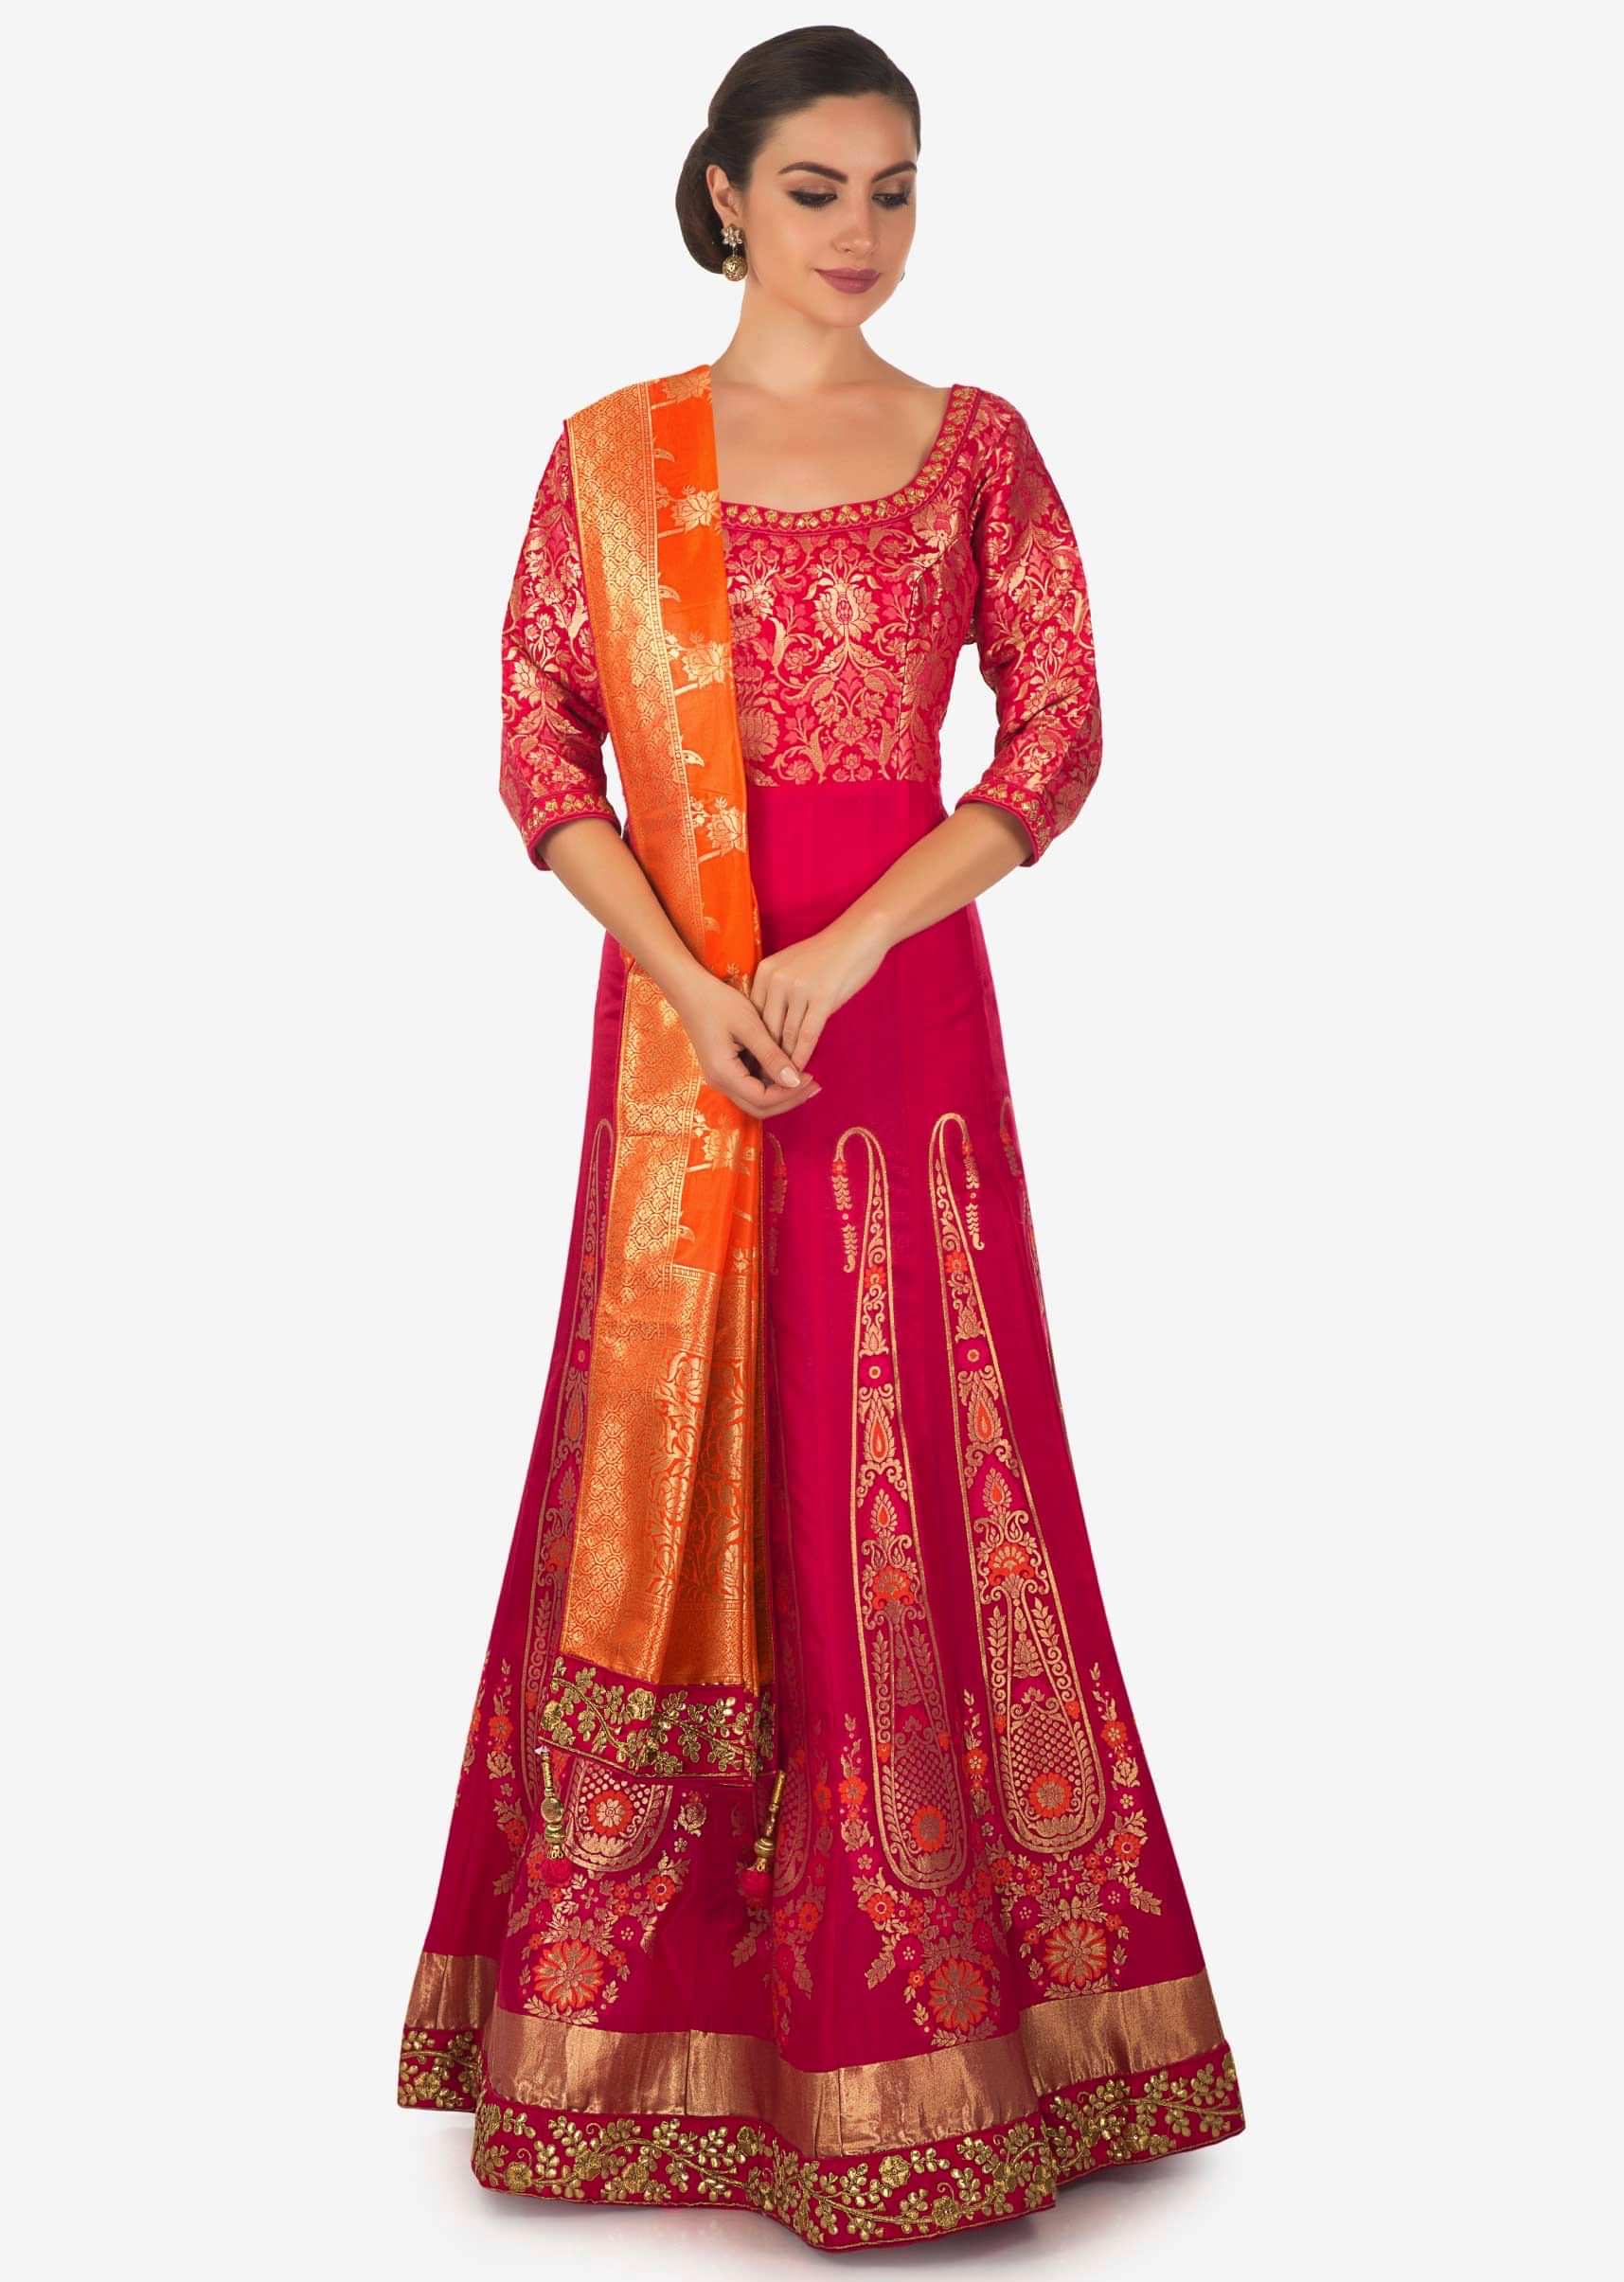 Rani pink brocade anarkali suit adorn in gotta patch embroidery only on Kalki